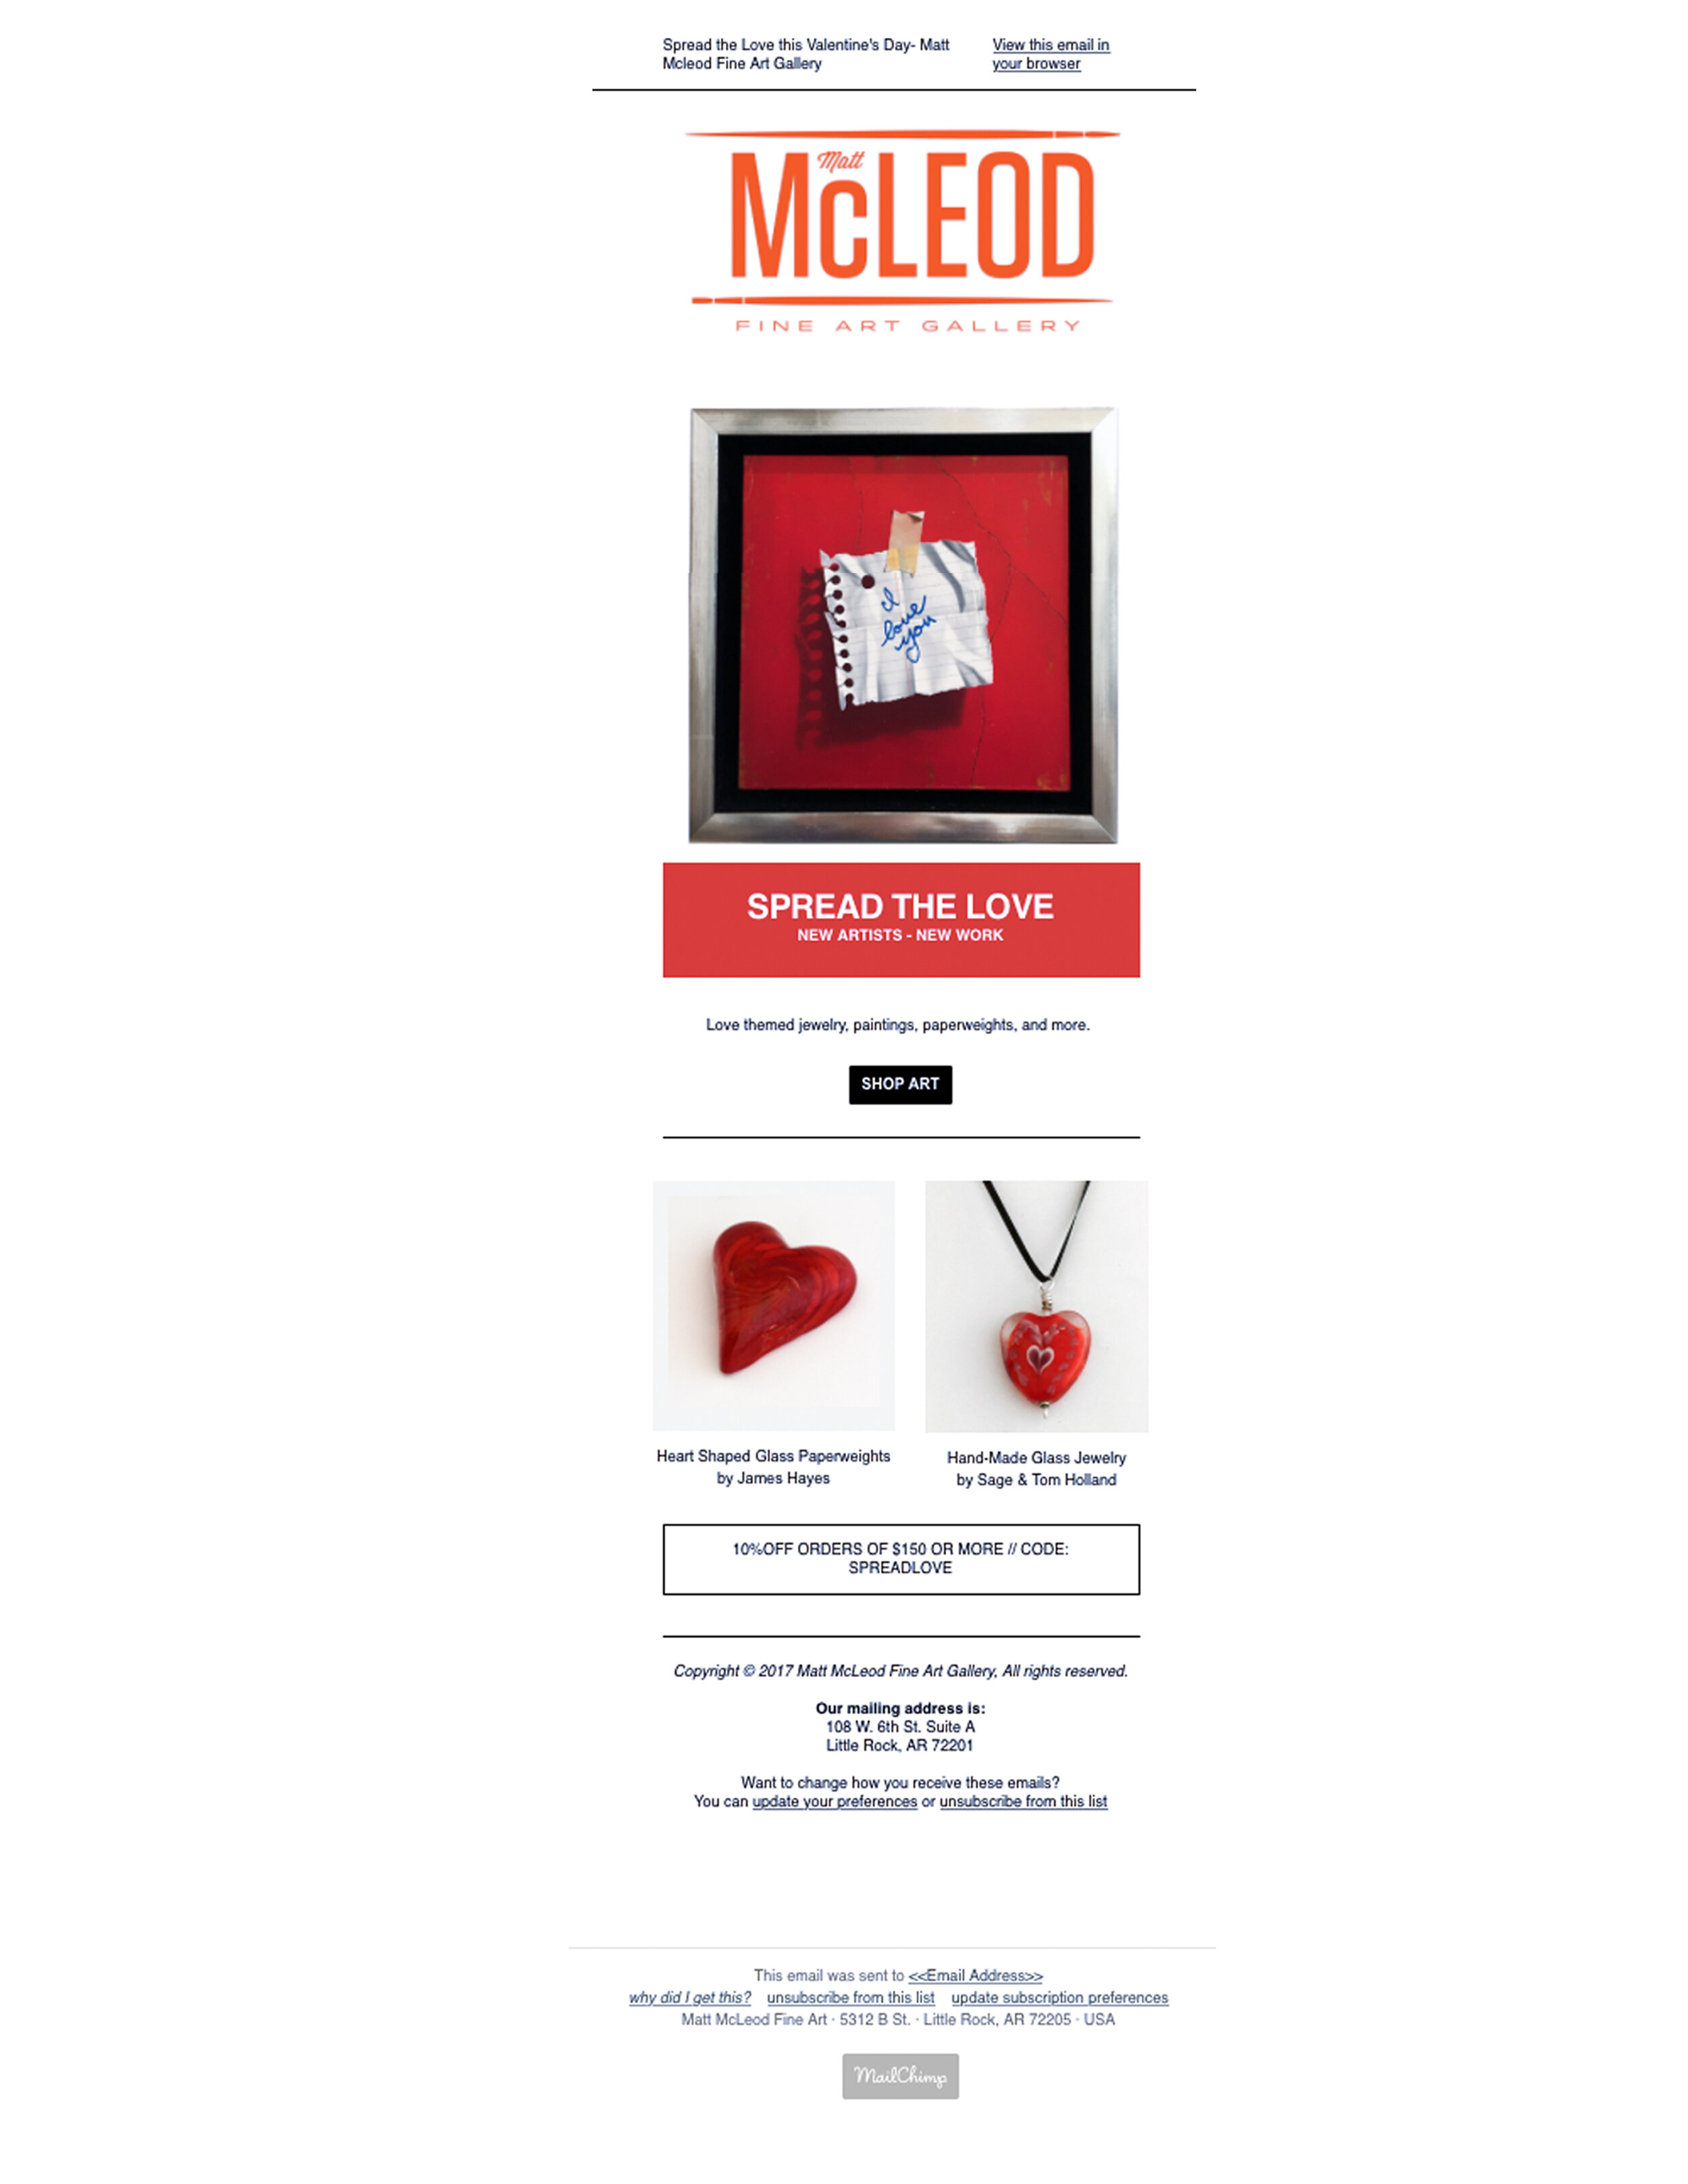 Spread the Love this Valentine's Day E-Newsletter